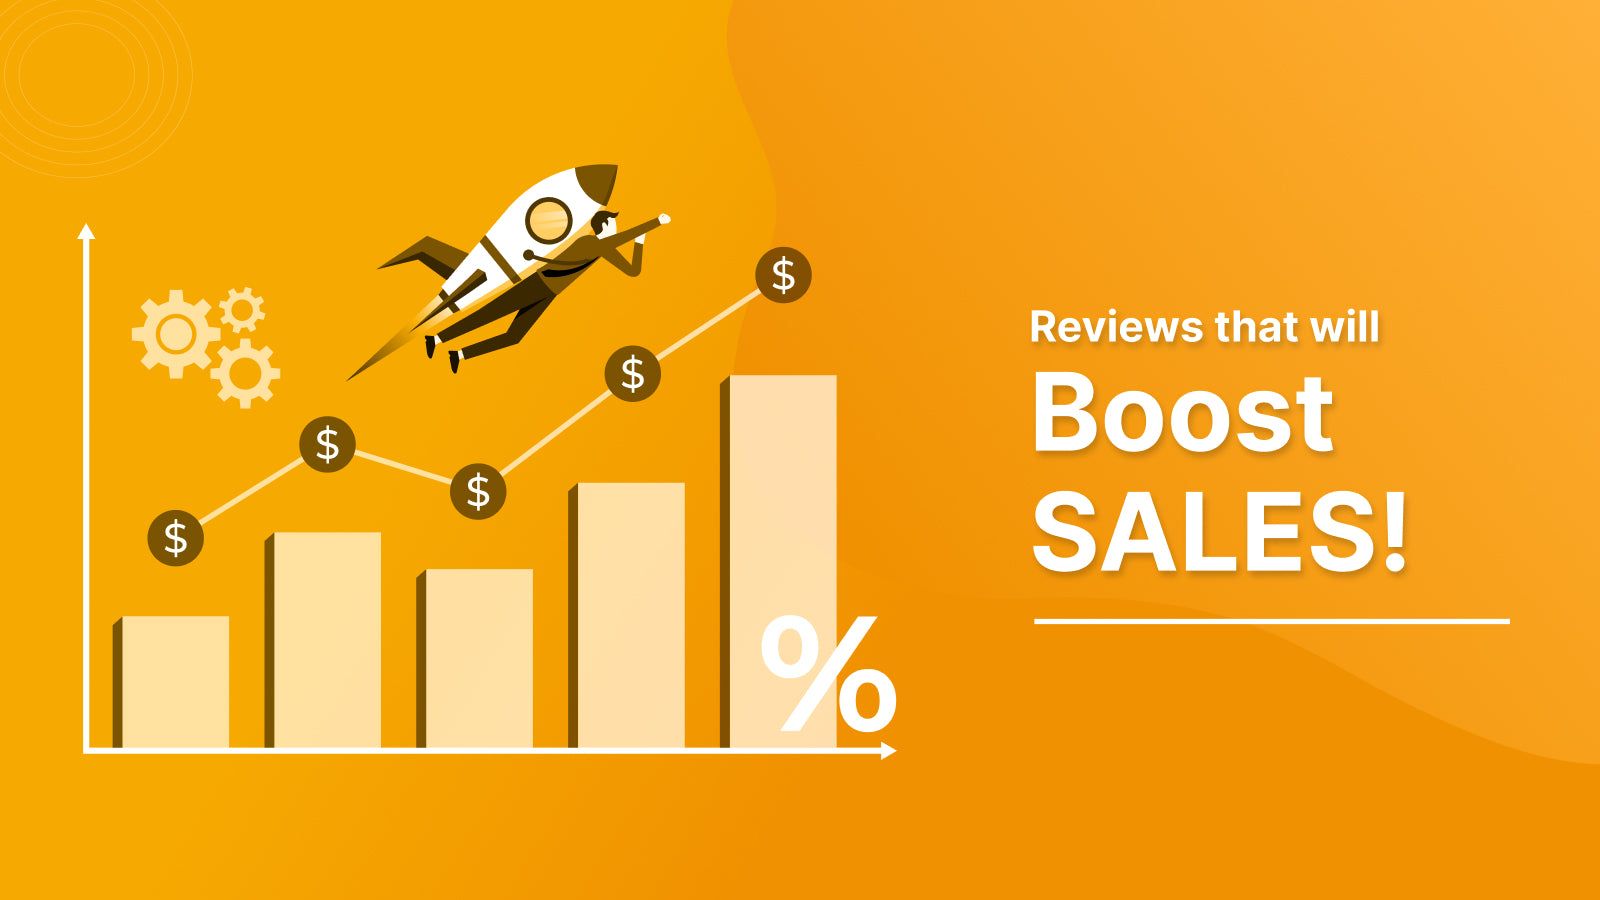 Reviews that will boost sales 